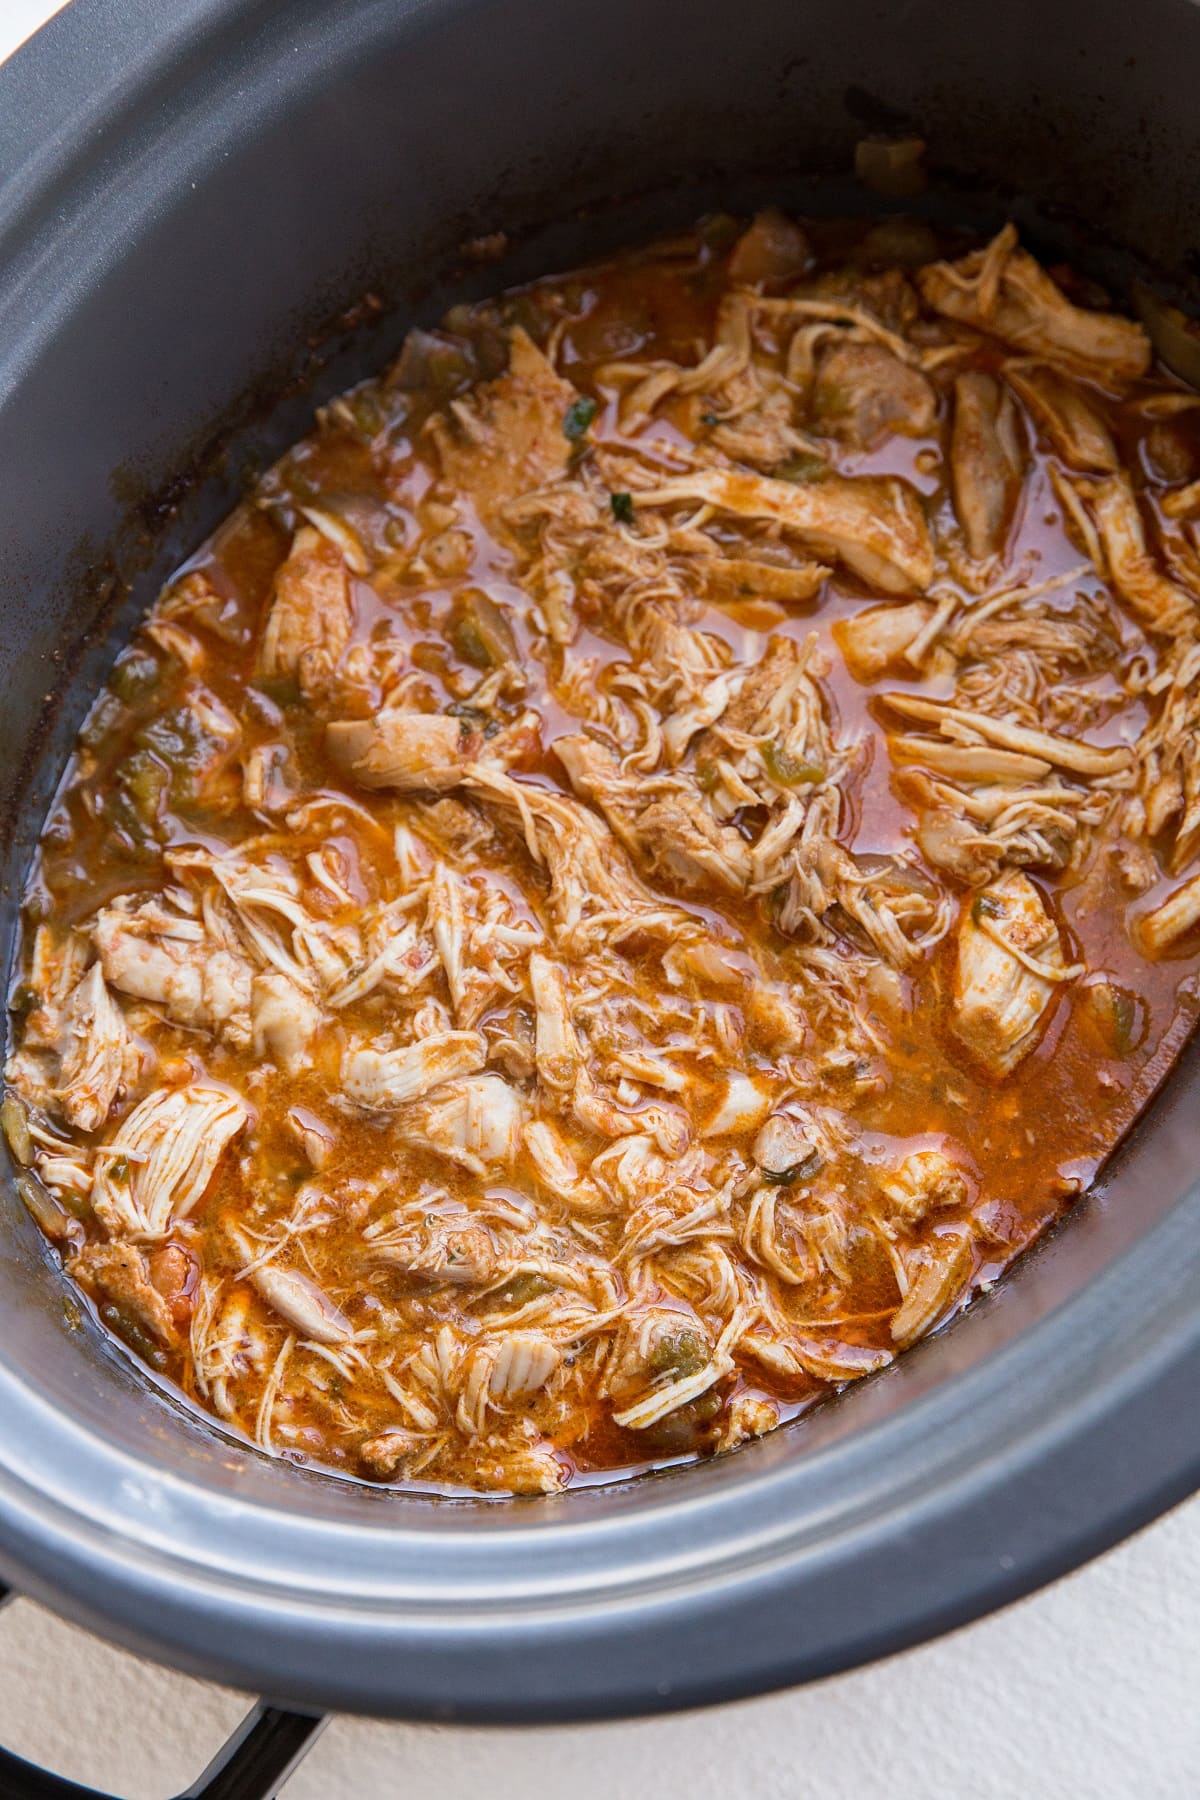 Slow Cooker Pulled Chicken: How to Make it With Just 3 Ingredients